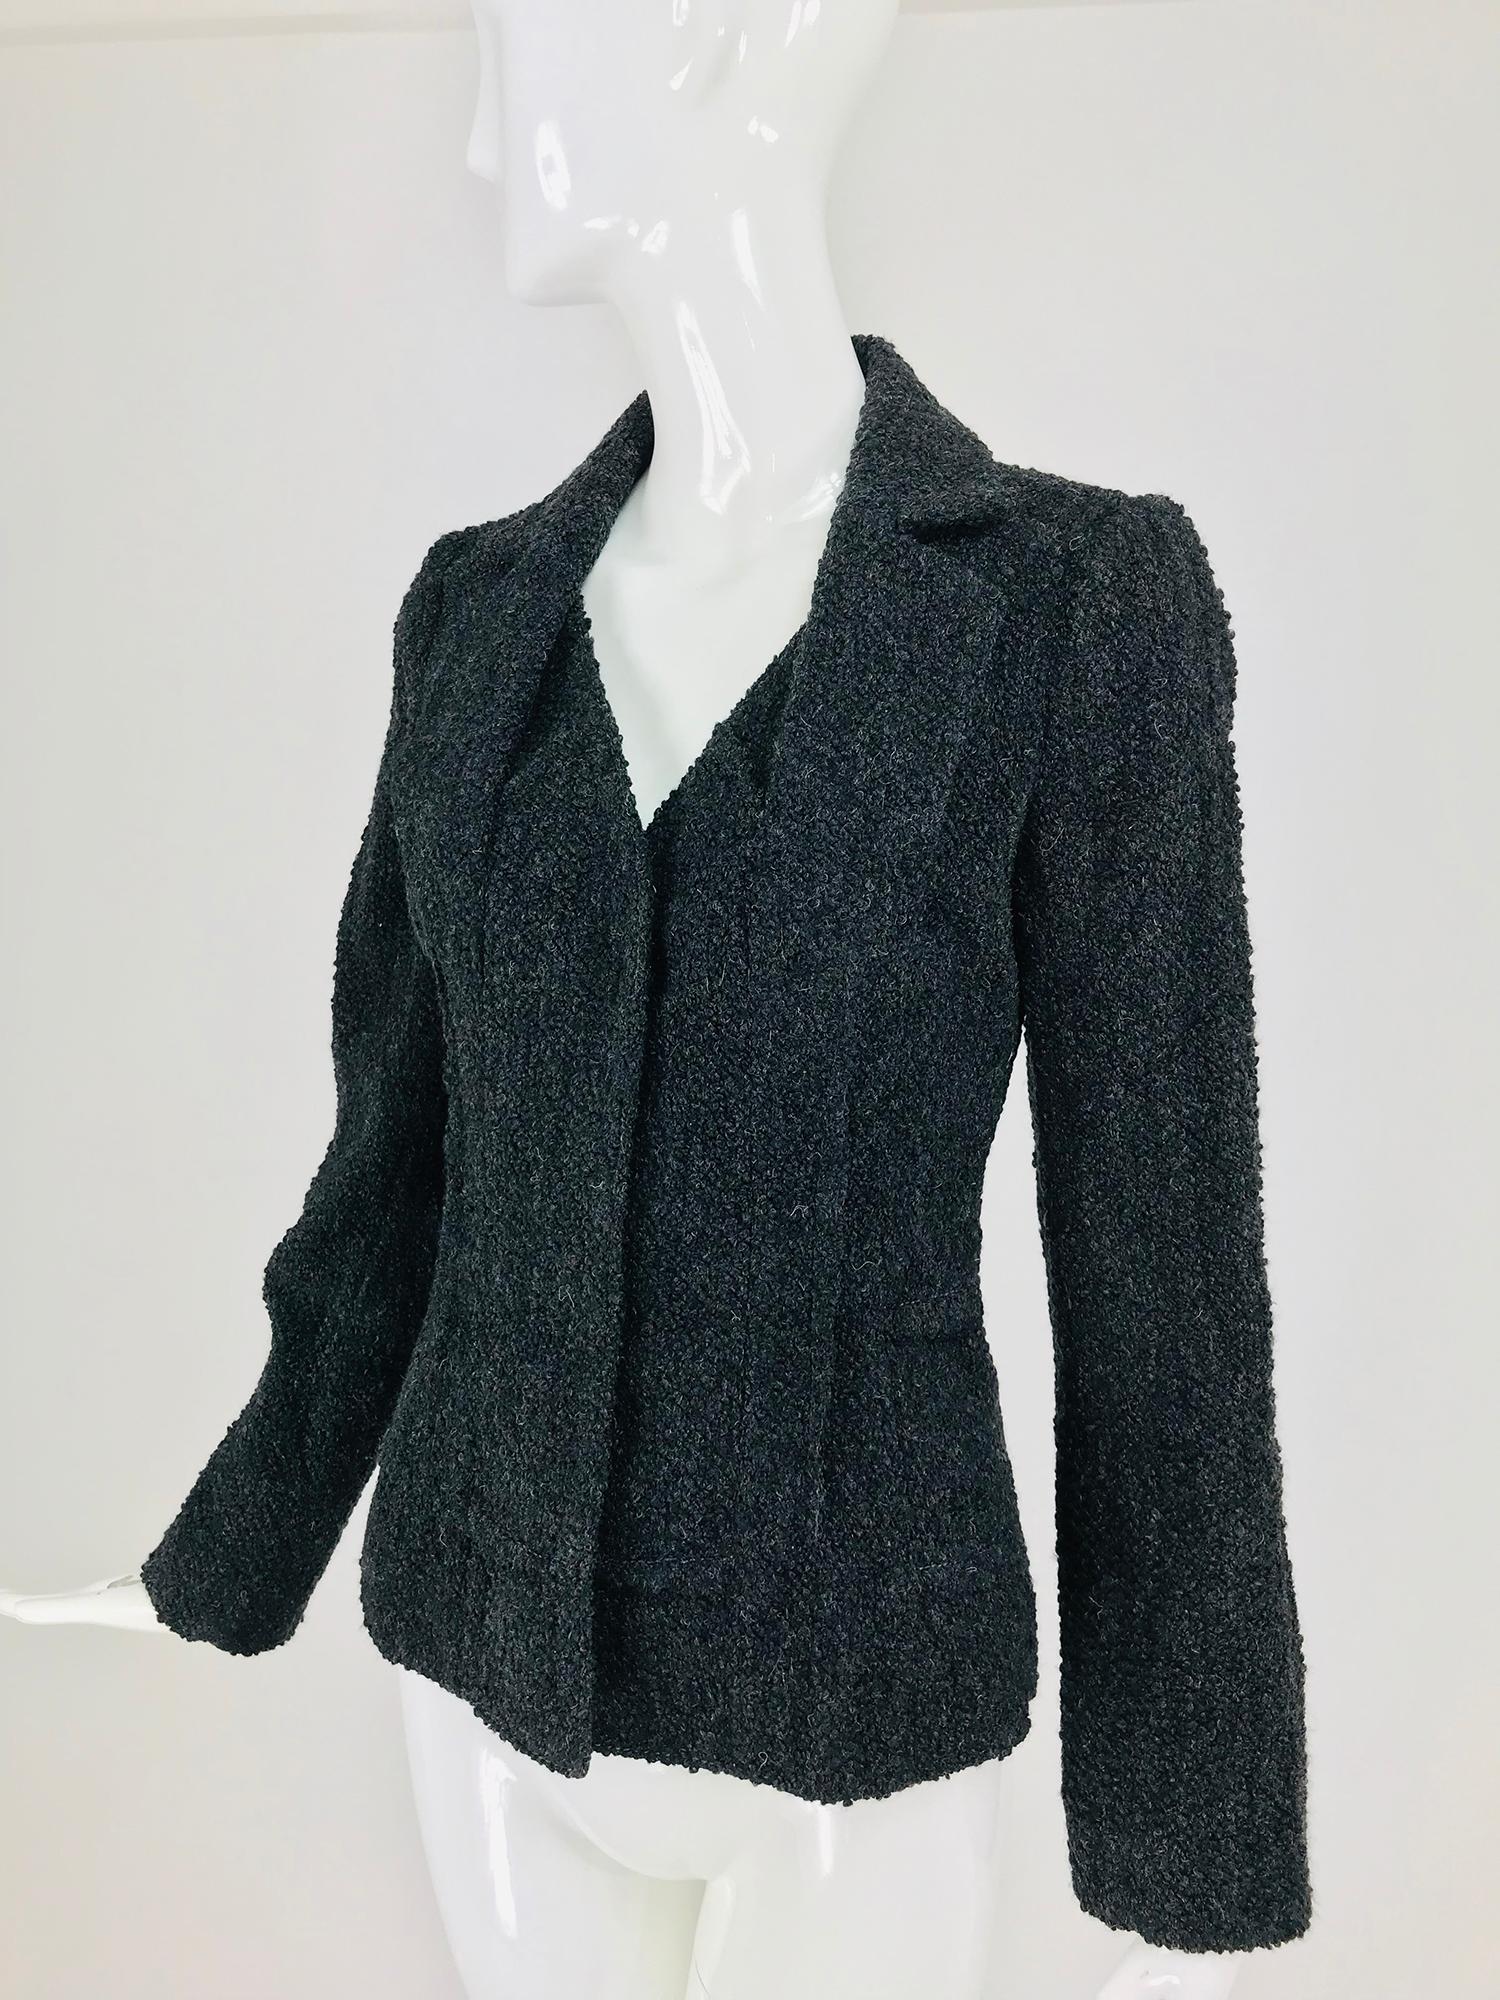 Christian Dior Boutique grey boucle outside seam jacket. Single breasted jacket closes with large hidden snaps. Long sleeves and bodice have outside seams. The lapels of the collar are not attached to the neckline but lay flat and give the jacket an